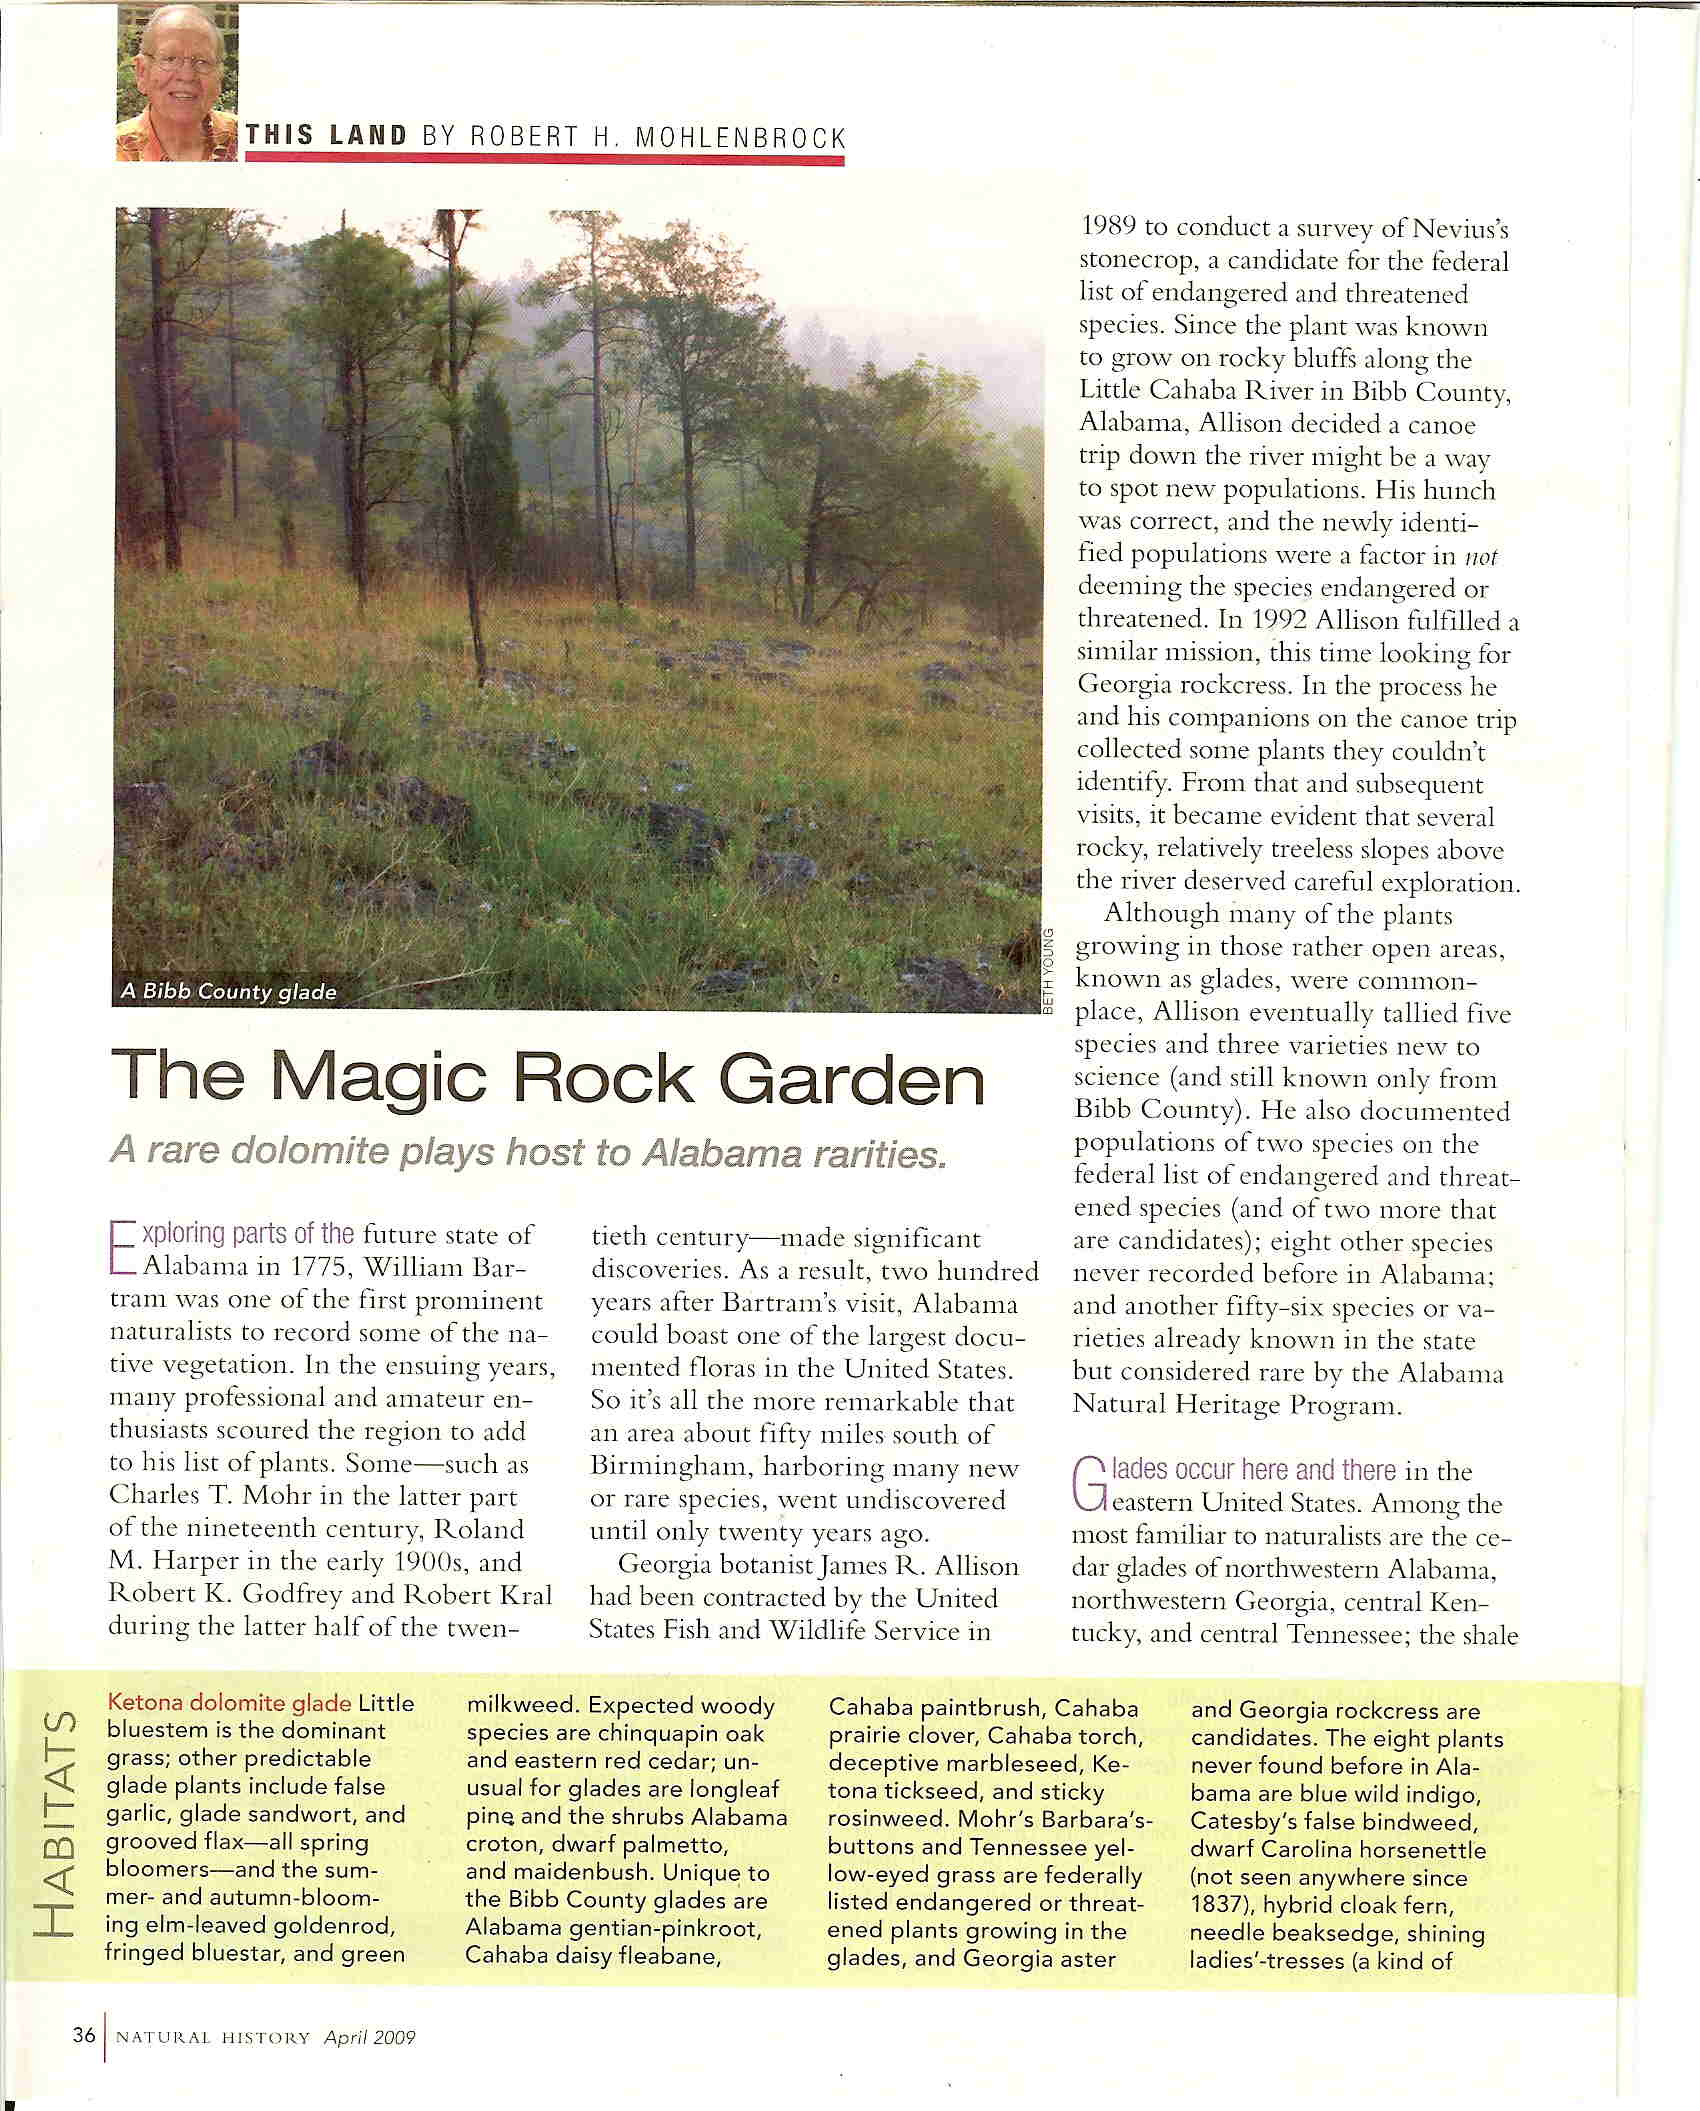 First page, Robert Mohlenbrock's April 2009 edition of his "This Land" series of articles in Natural History magazine: The Magic Rock Garden